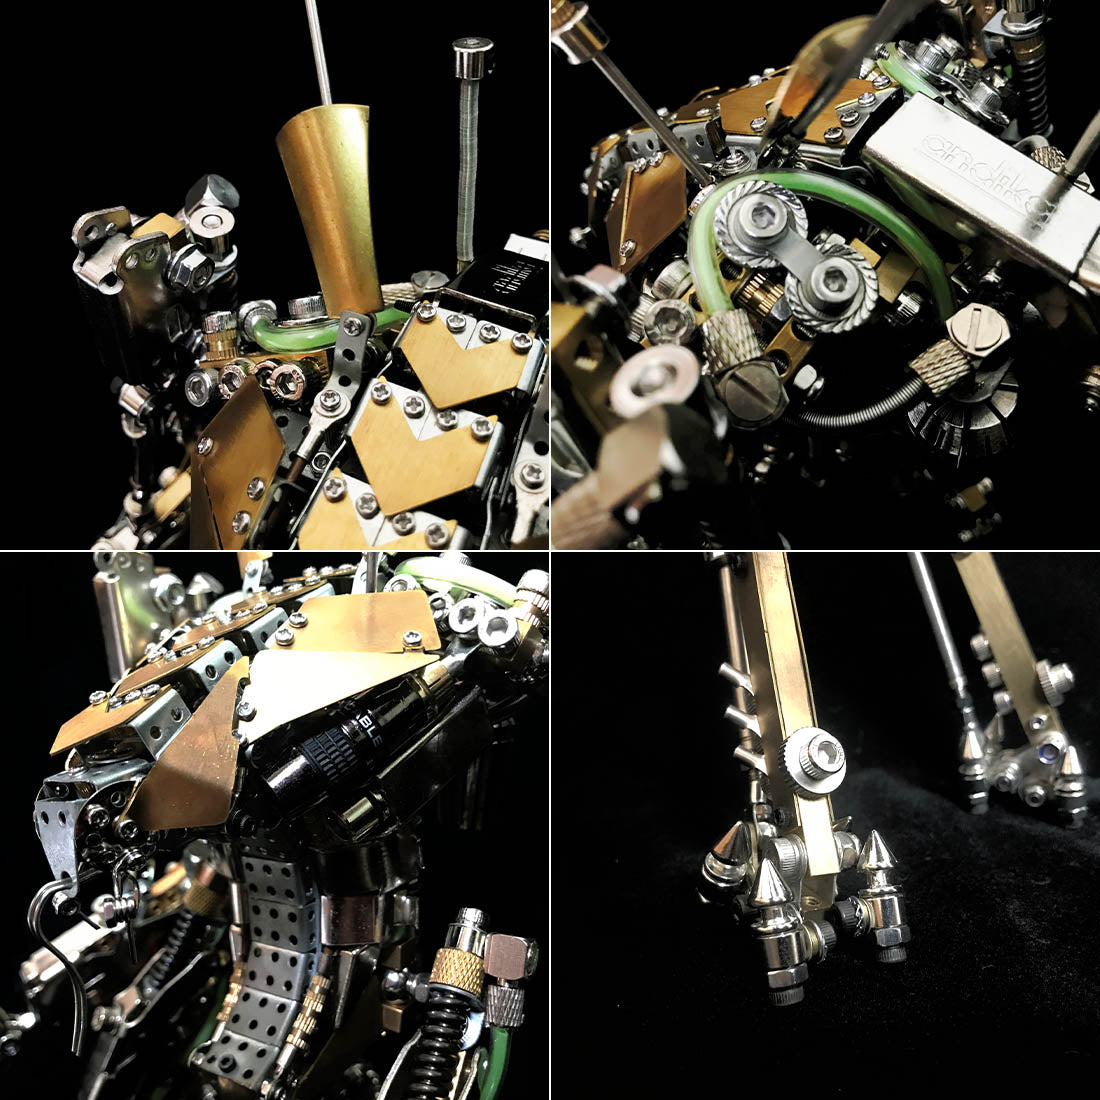 lobster-shrimp-heavy-mech-robot-3d-metal-puzzle-led-with-movable-joints-xia-a